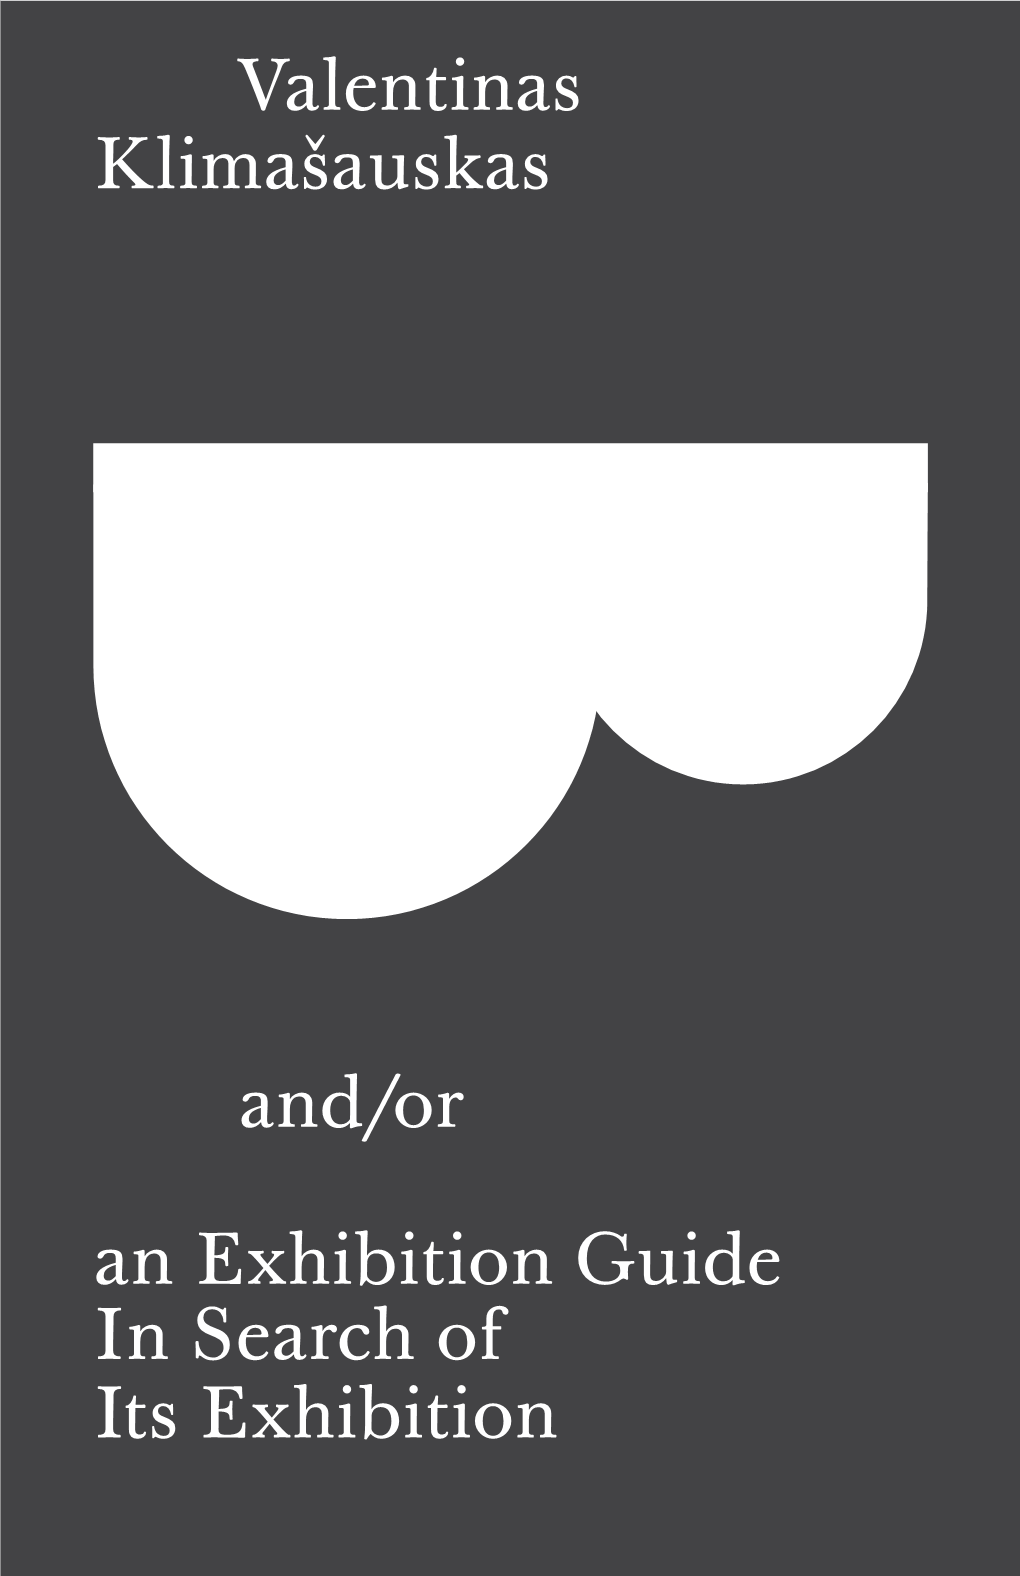 B And/Or an Exhibition Guide in Search of Its Exhibition